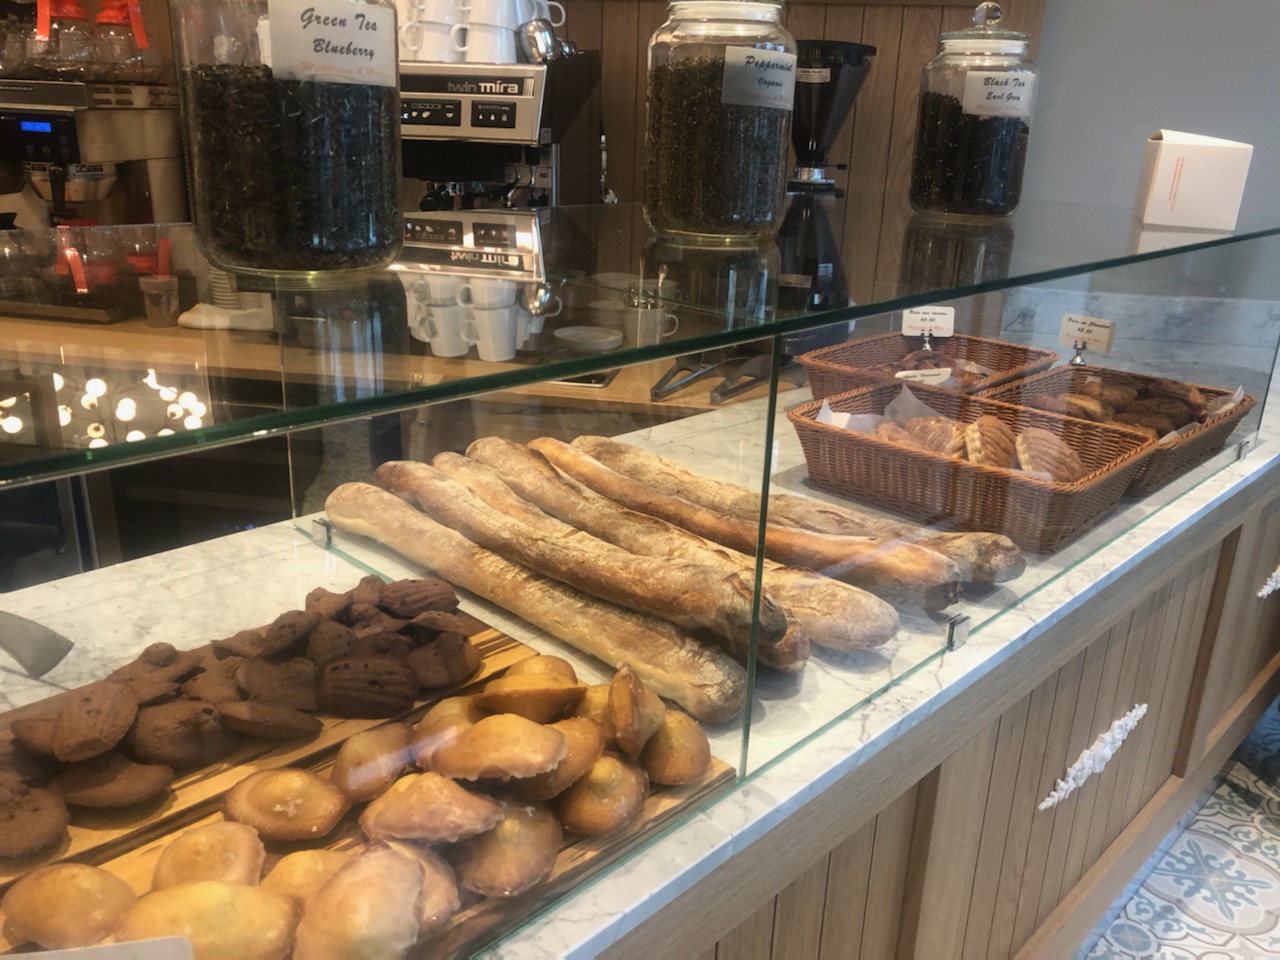 Madeleines+and+More%3A+The+Latest+Destination+for+Sweets+Treats+on+Miracle+Mile